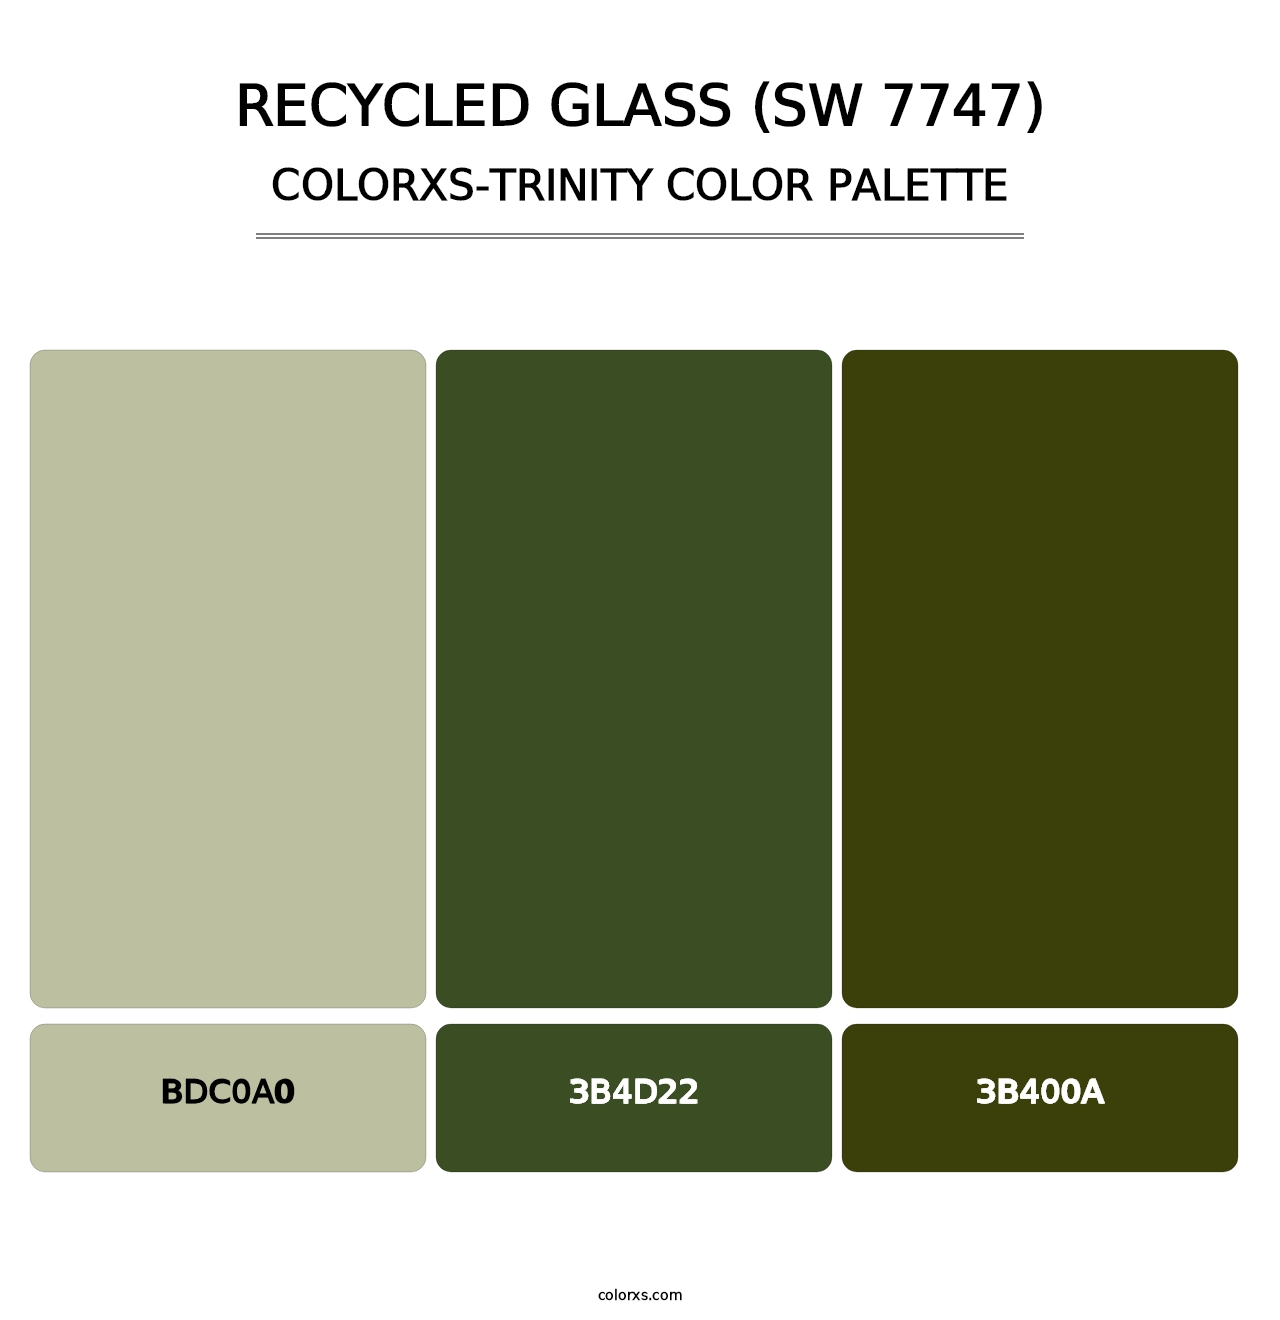 Recycled Glass (SW 7747) - Colorxs Trinity Palette